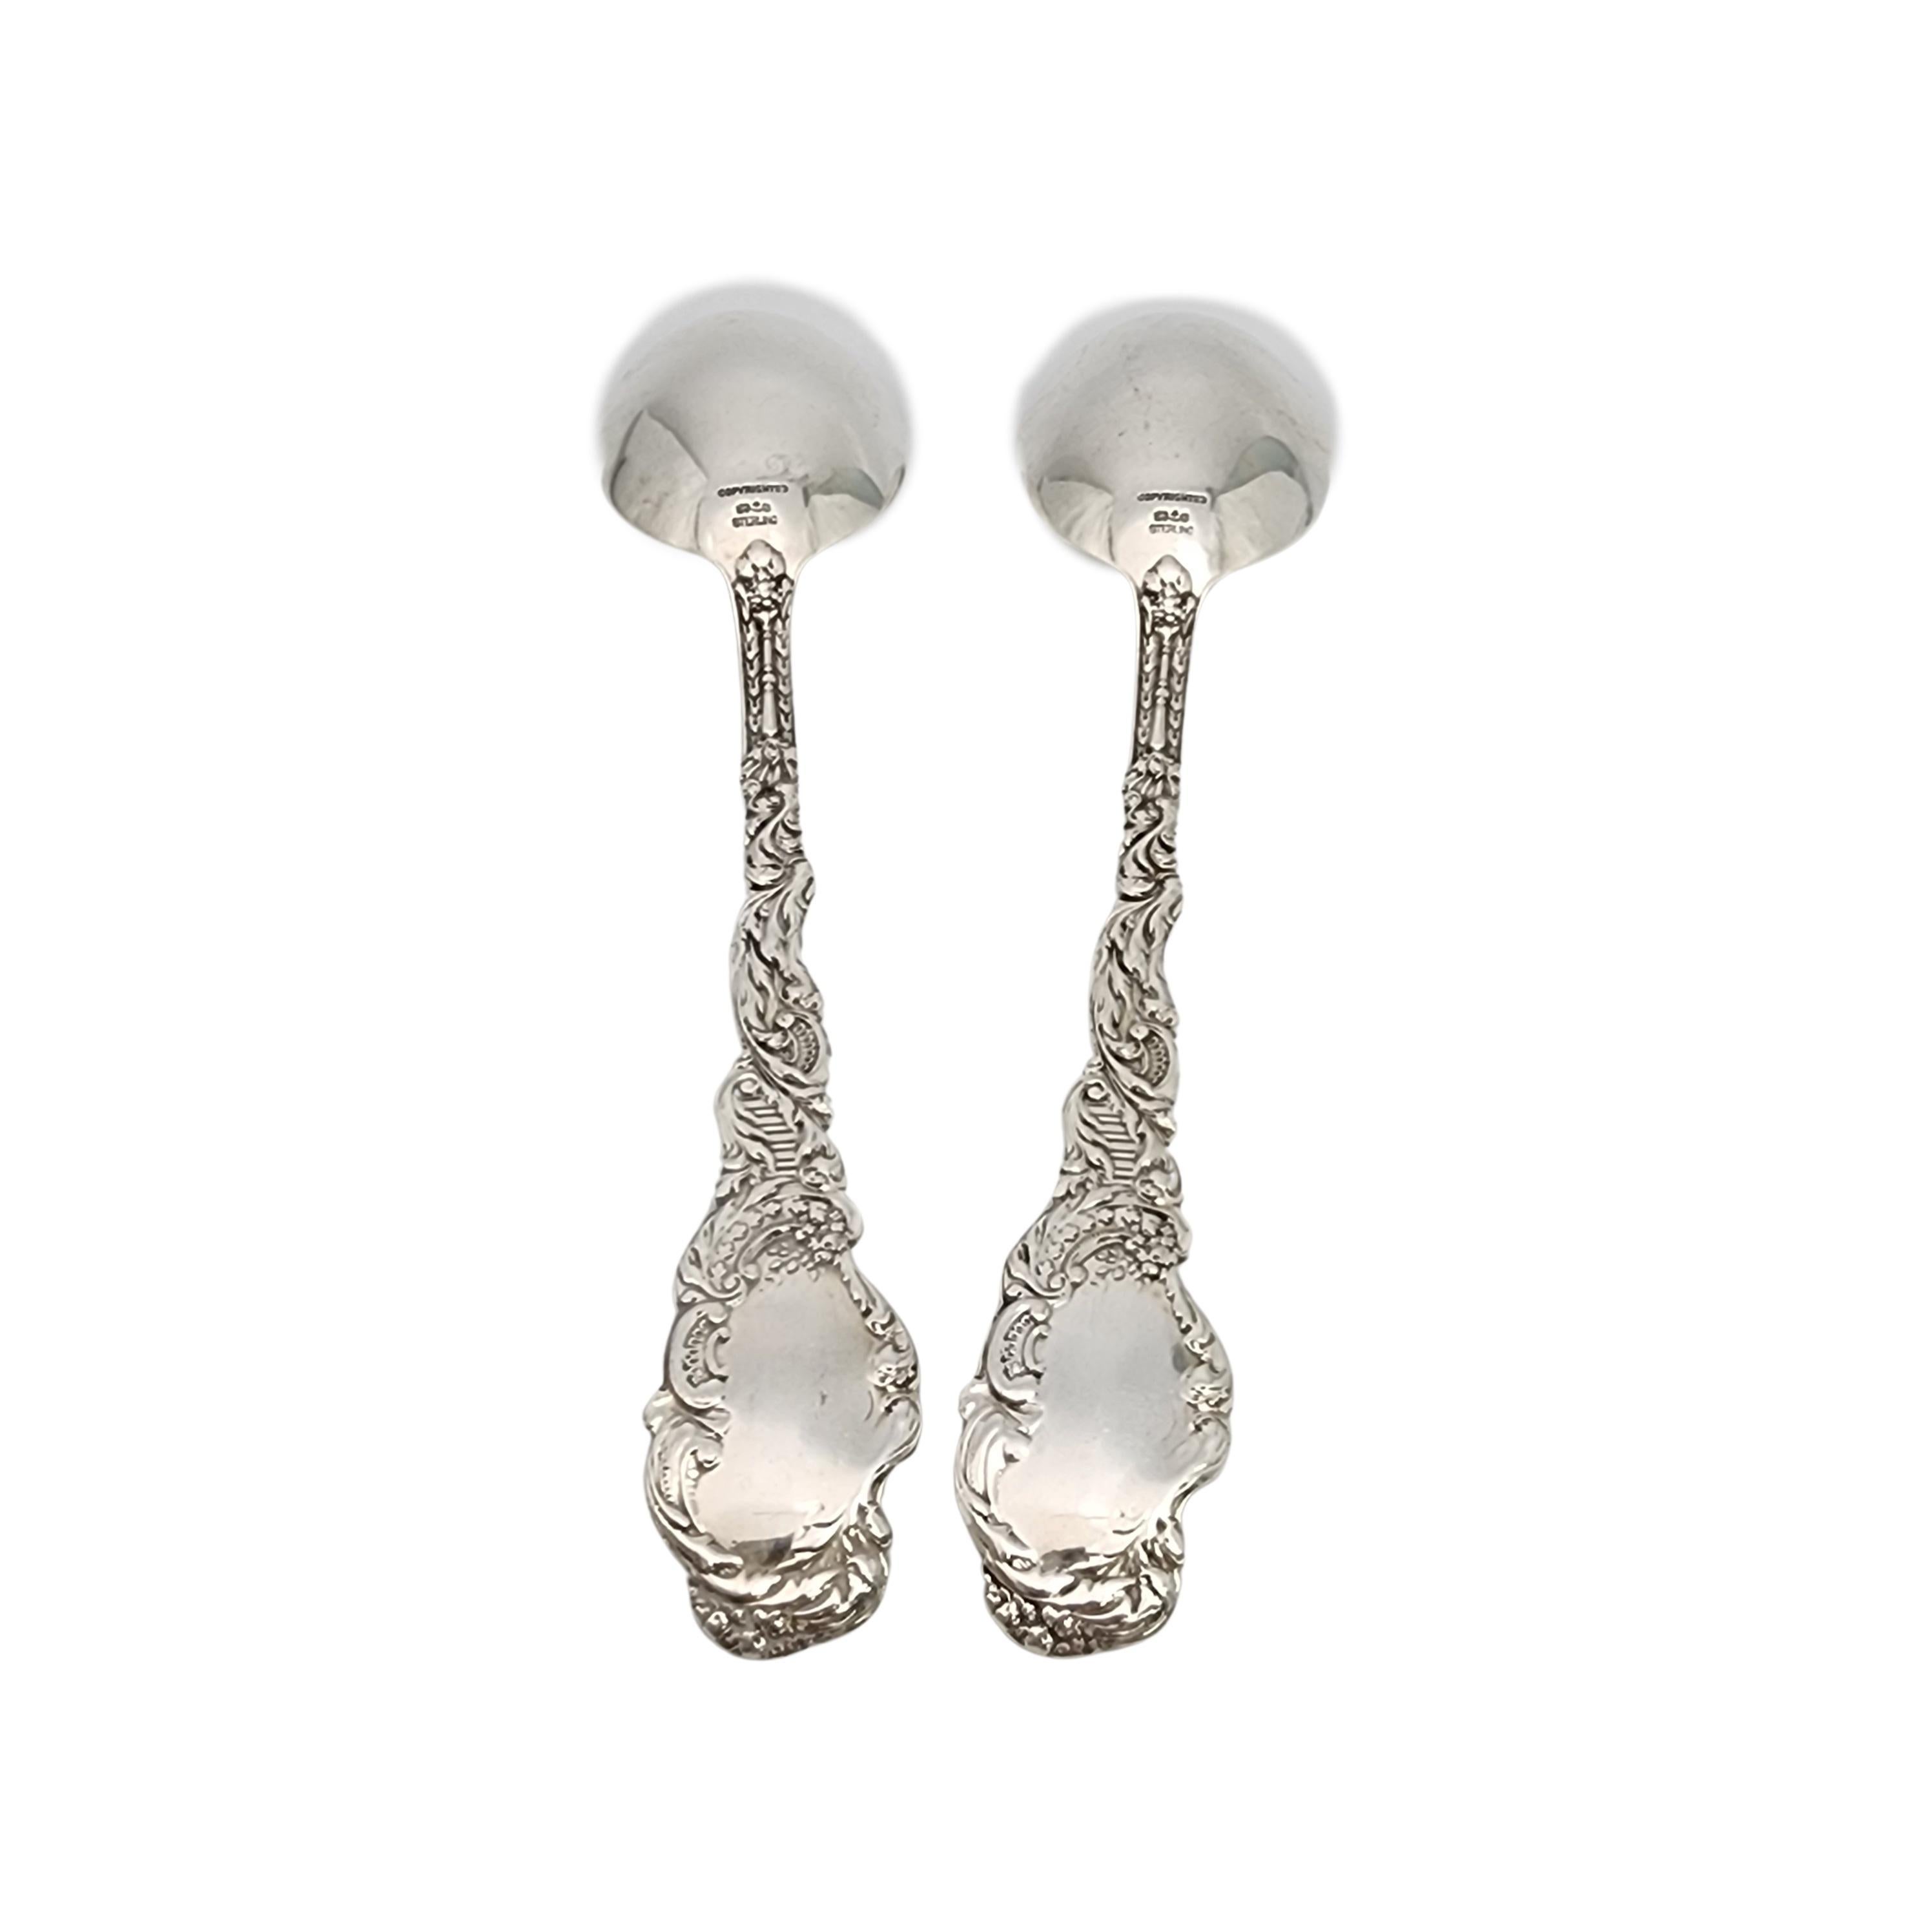 Set of 2 sterling silver large dessert/soup spoons in the Versailles pattern by Gorham.

No monogram.

Gorham's Versailles is a multi motif pattern designed by Antoine Heller in 1885. Named for the Palace of Versailles, the pattern depicts ornate